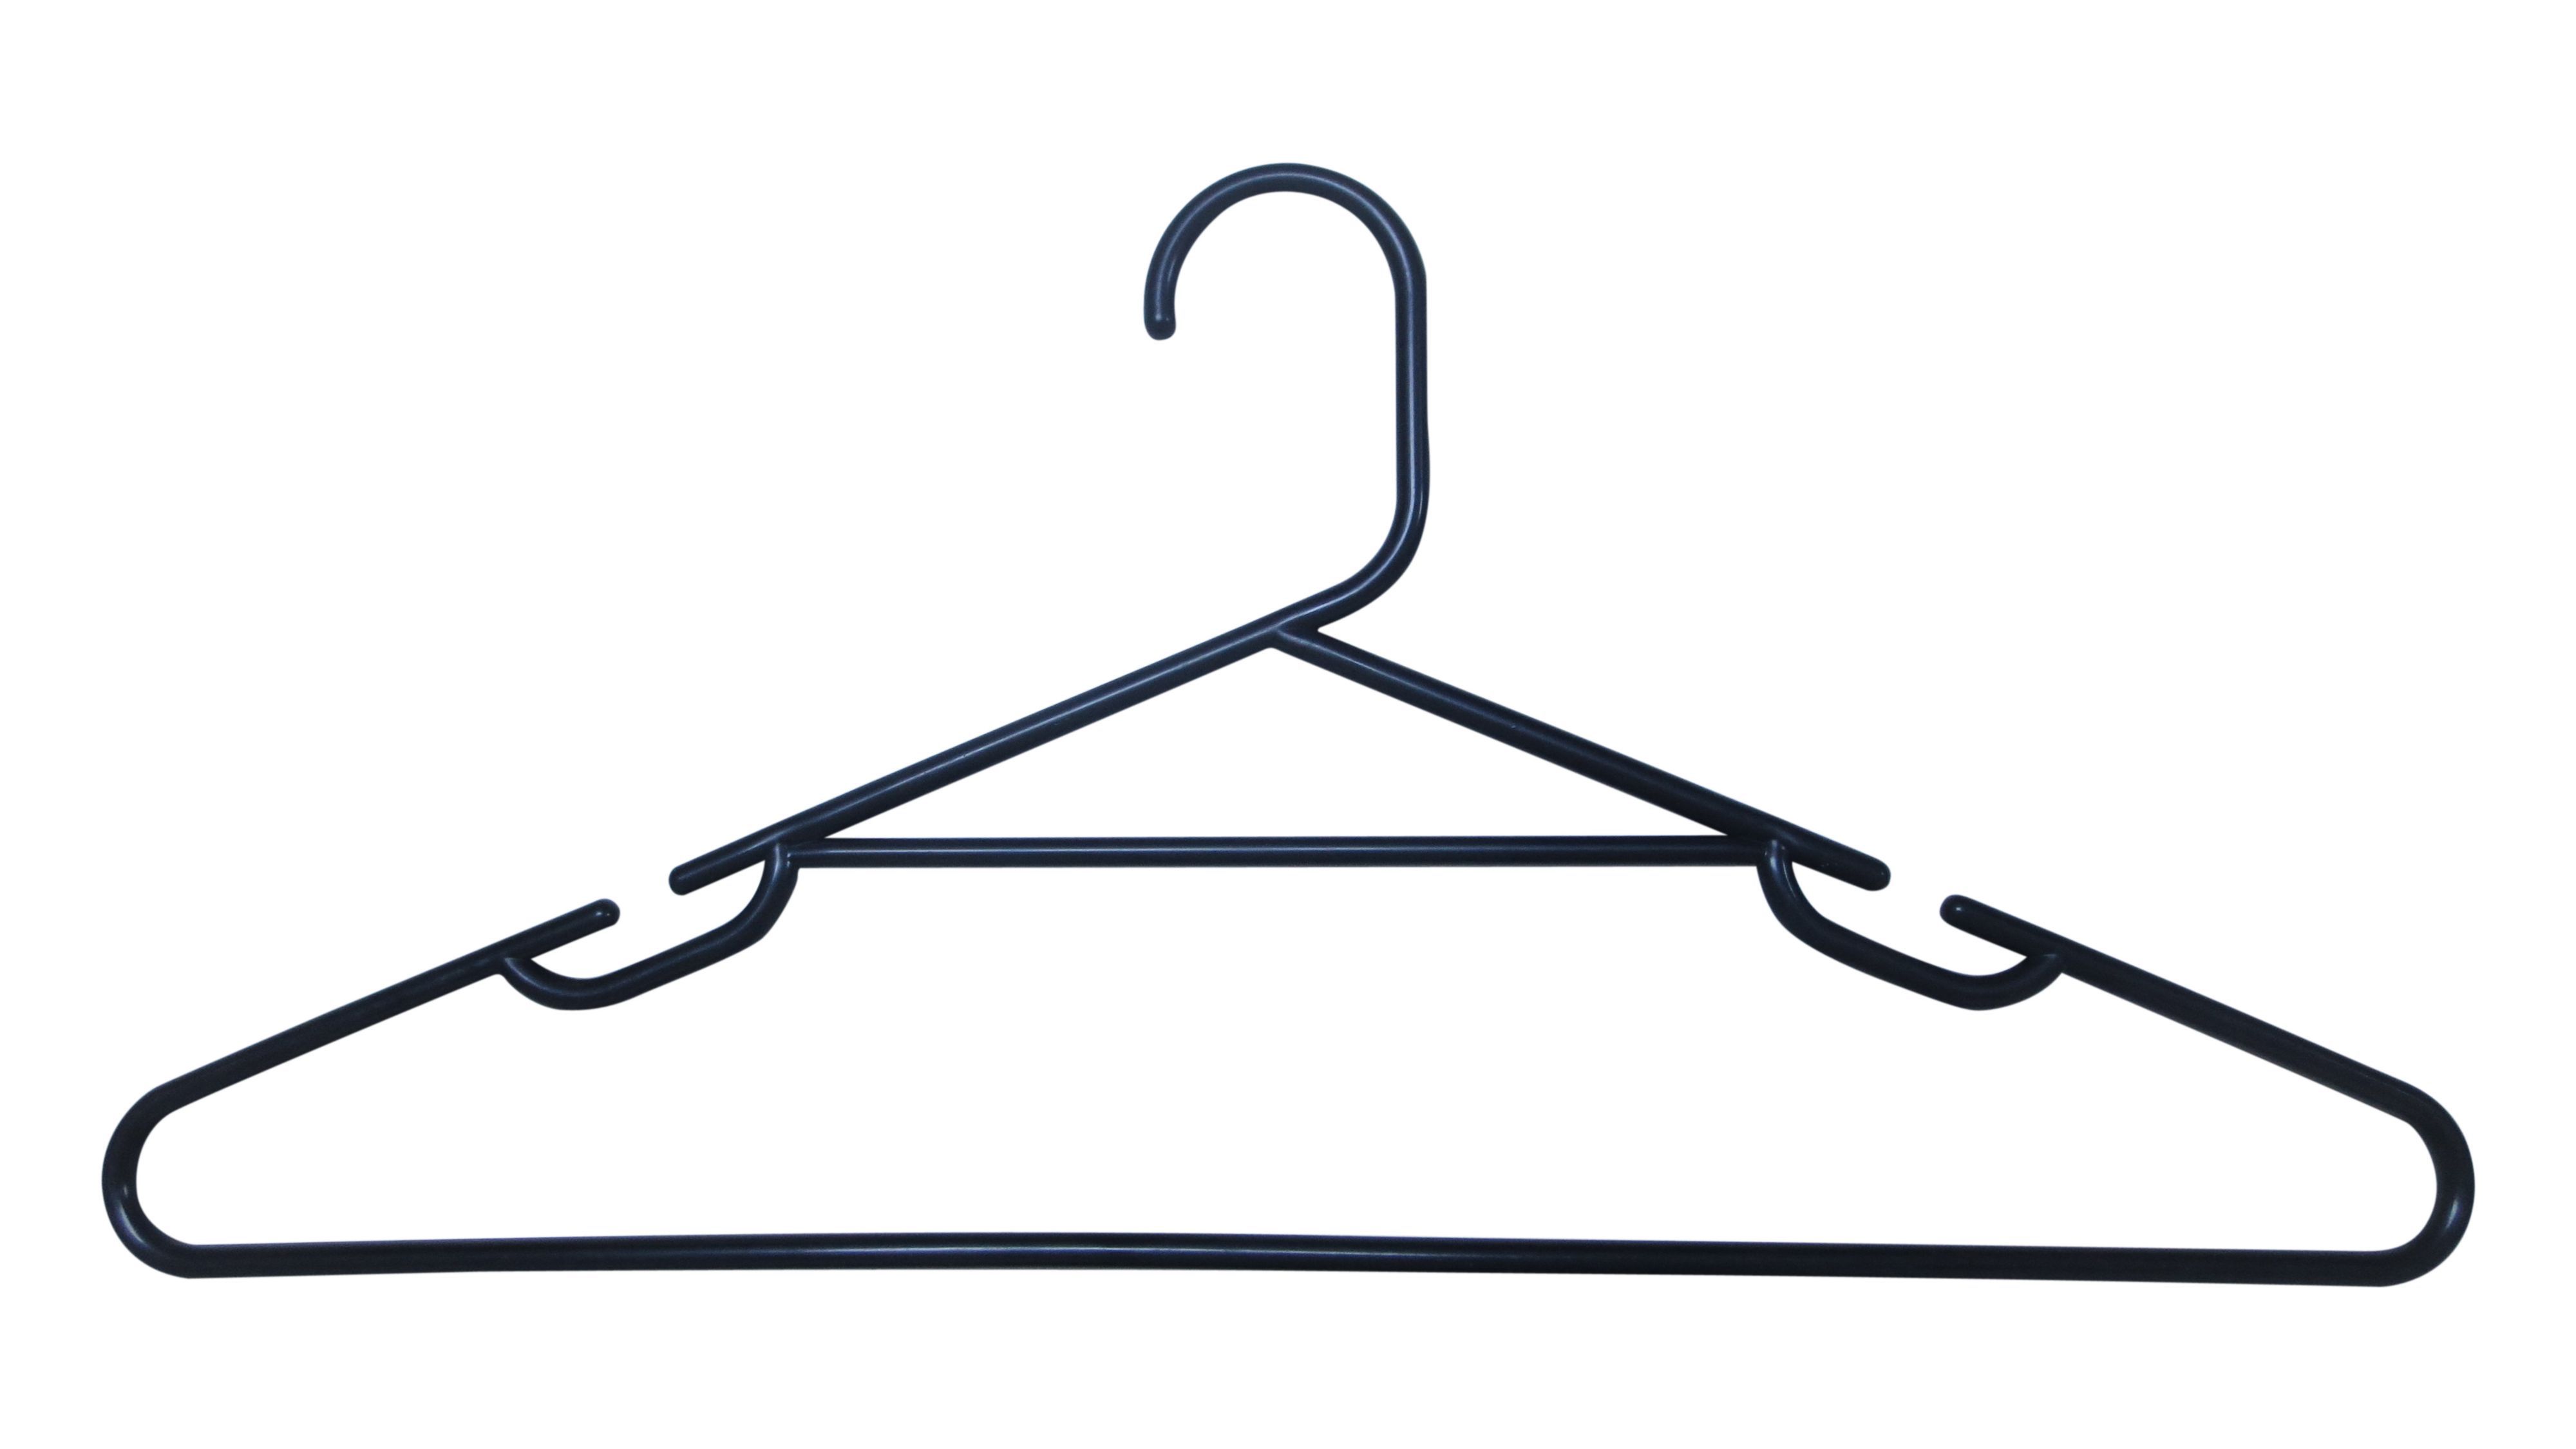 https://media.diy.com/is/image/Kingfisher/form-black-plastic-clothes-hangers-pack-of-10~5052931286119_02c?$MOB_PREV$&$width=618&$height=618